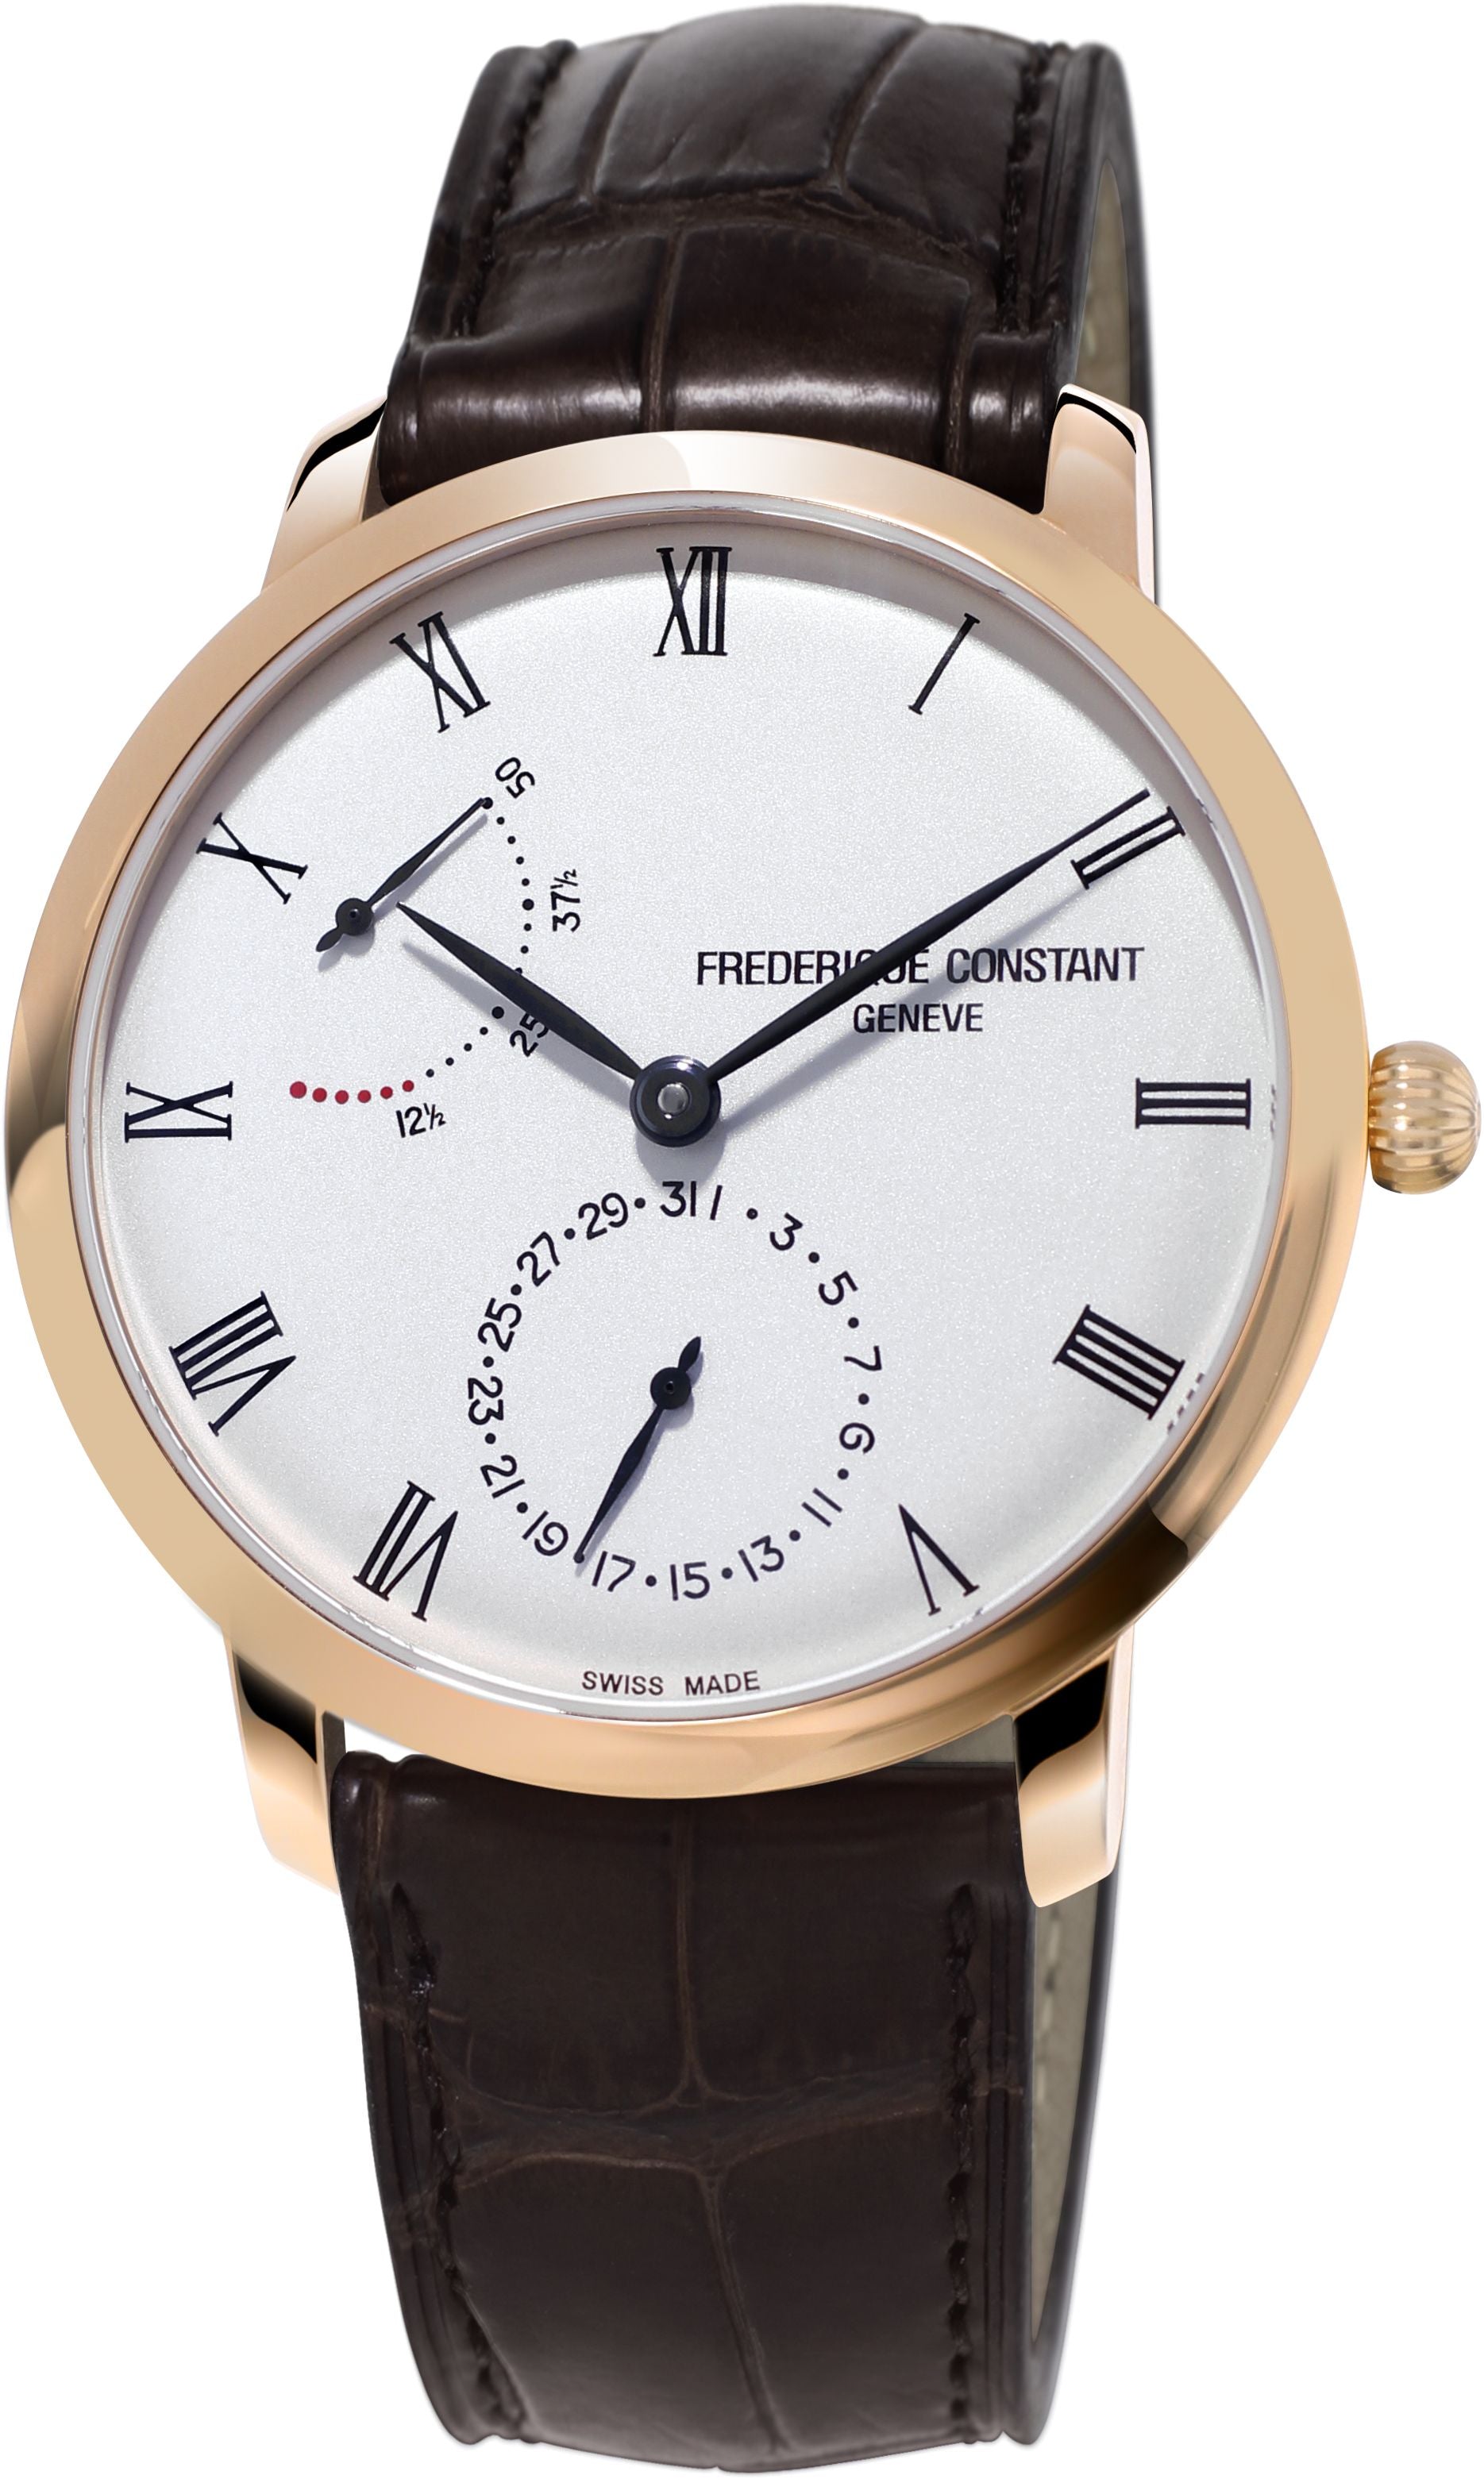 FREDERIQUE CONSTANT MENS STAINLESS STEEL Rose Gold-Tone Manufacture MANUFACTURE Alligator Strap